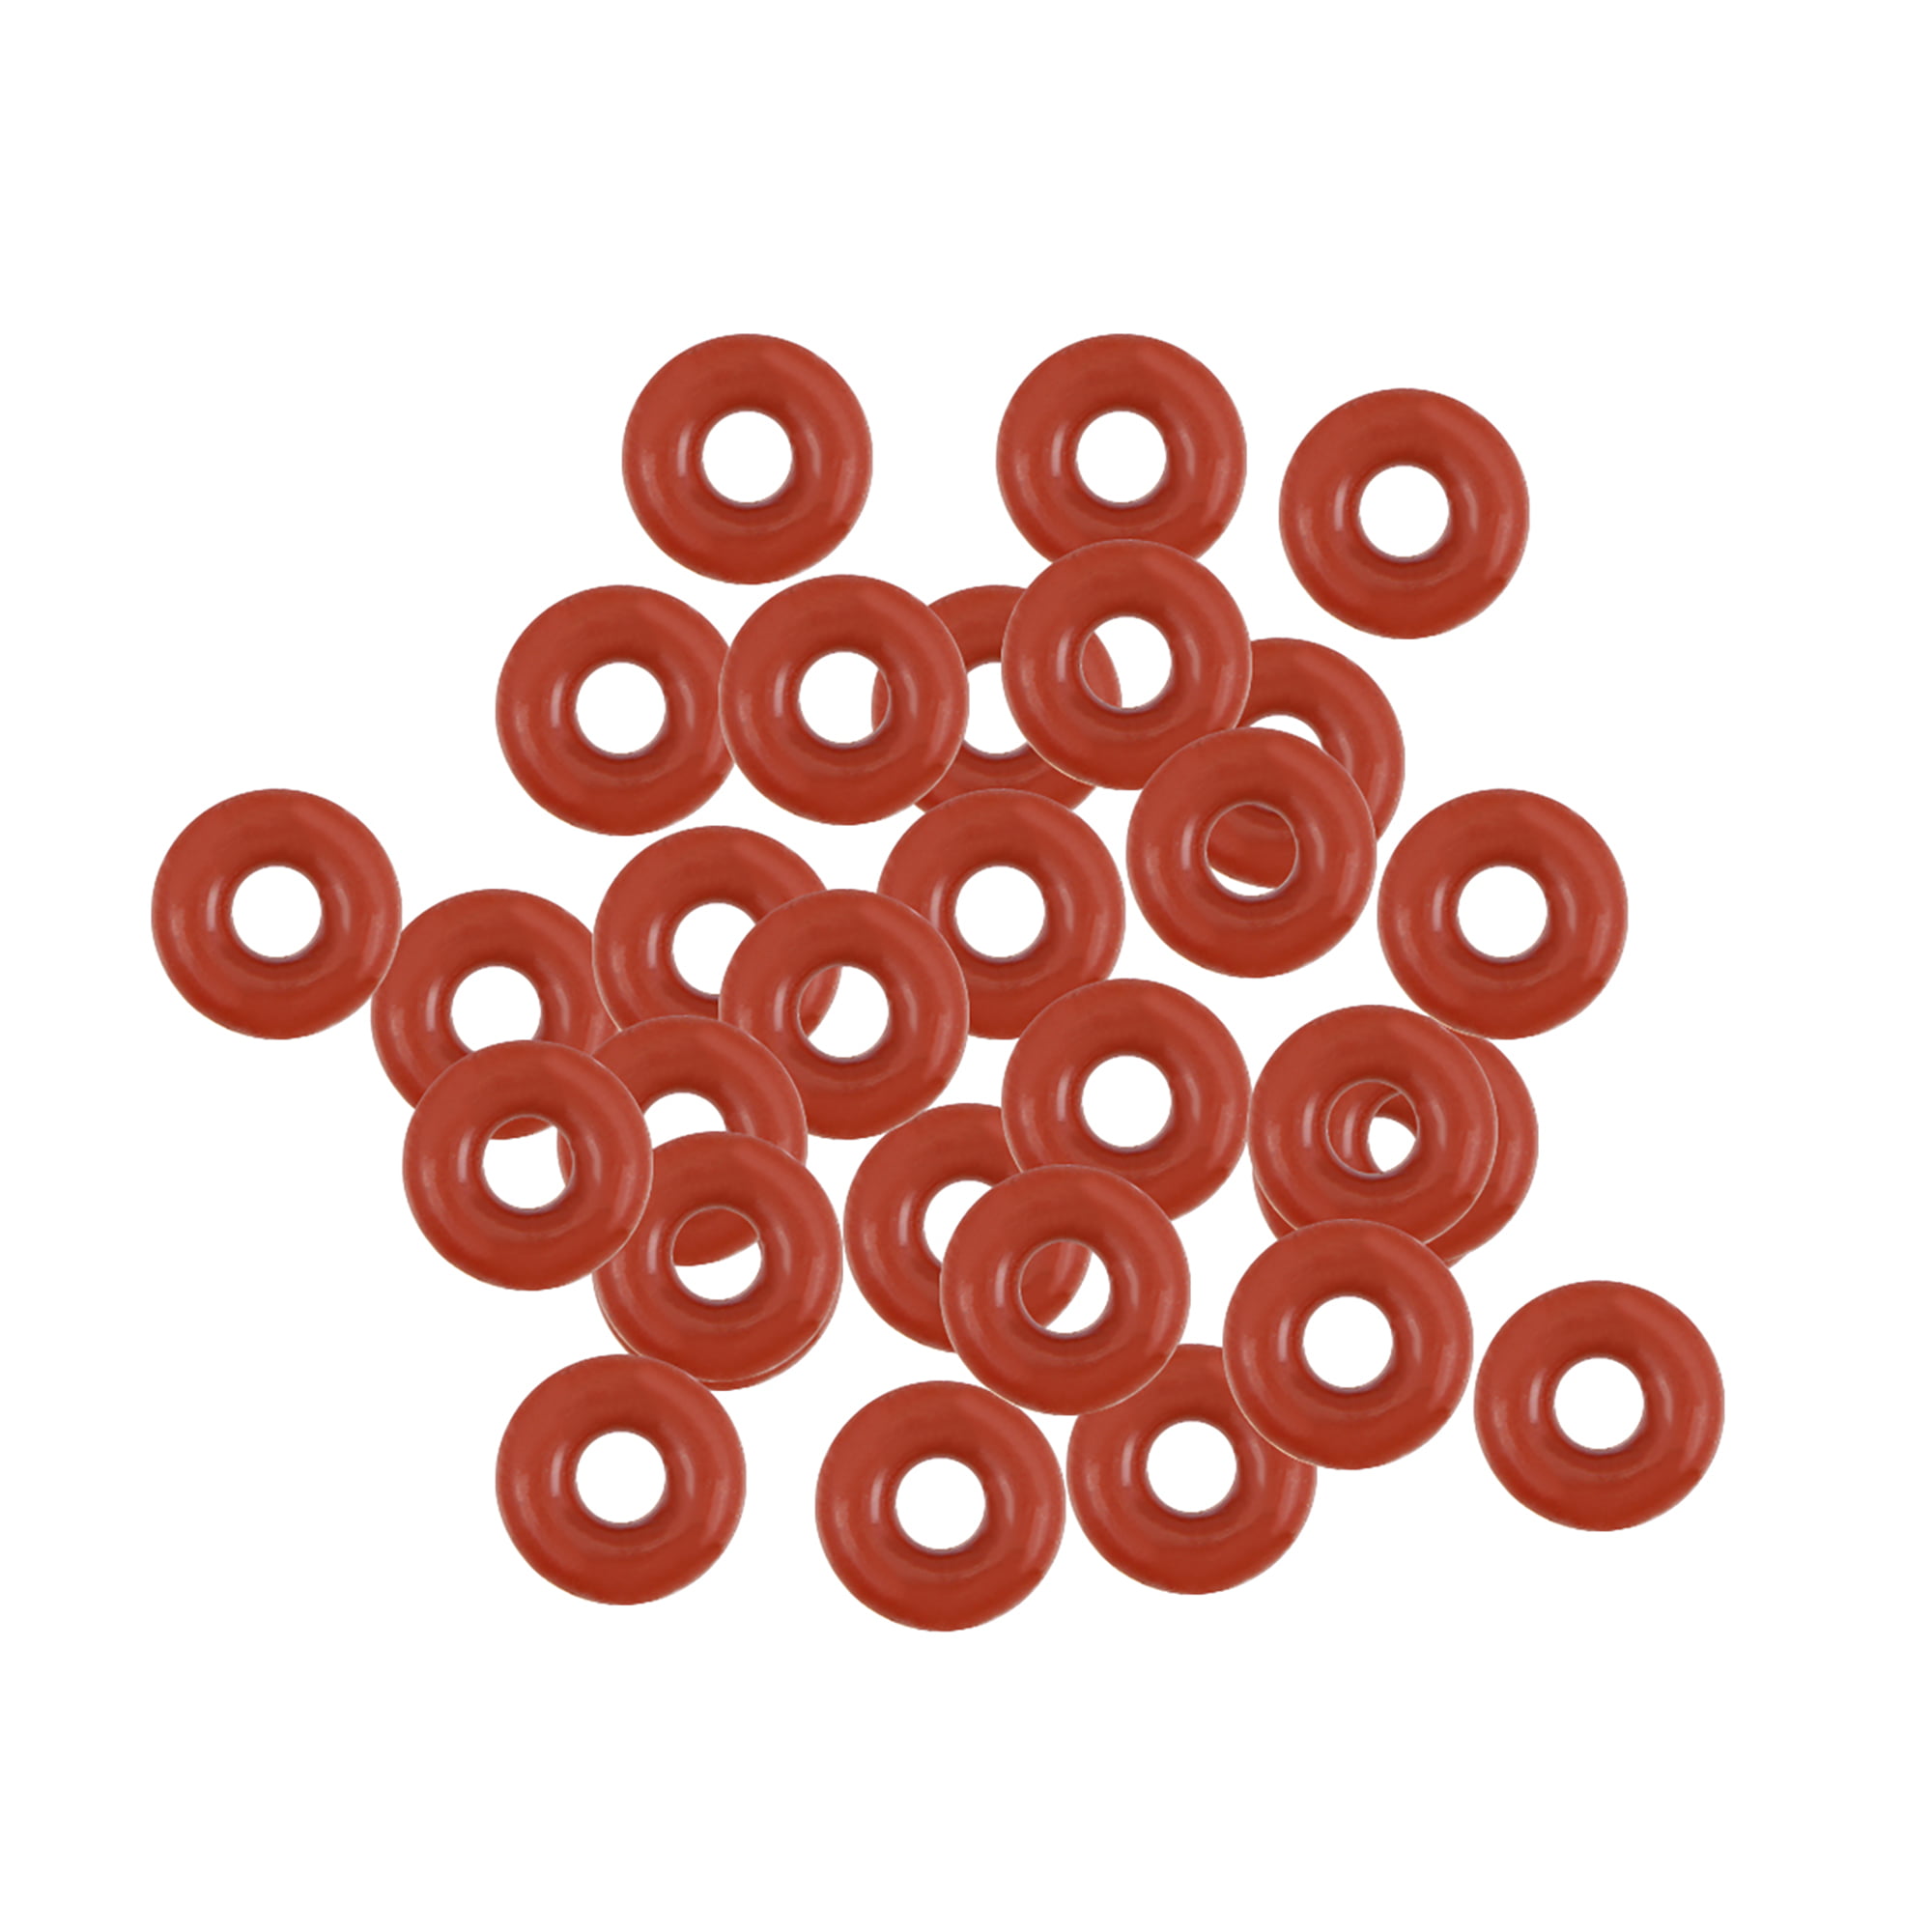 Silicone O-rings 90 x 5mm Price for 1 pcs 